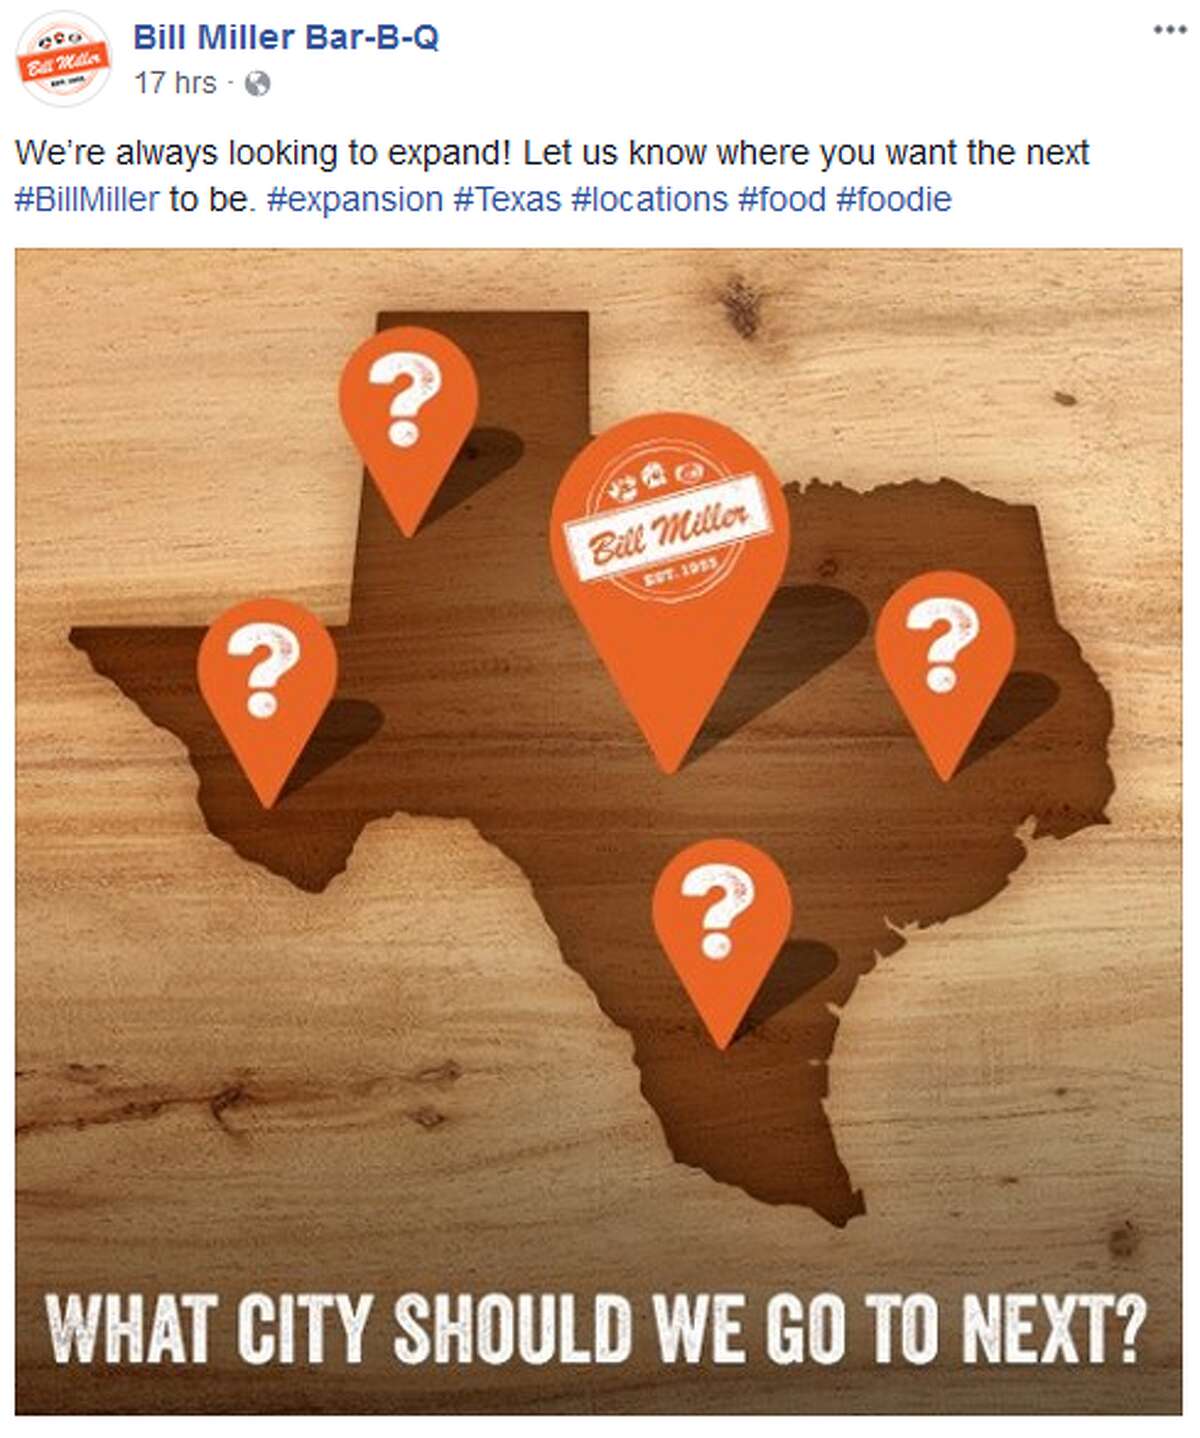 The San Antonio-based 'cue chain said in a Facebook post on Monday that the business is "always looking to expand."